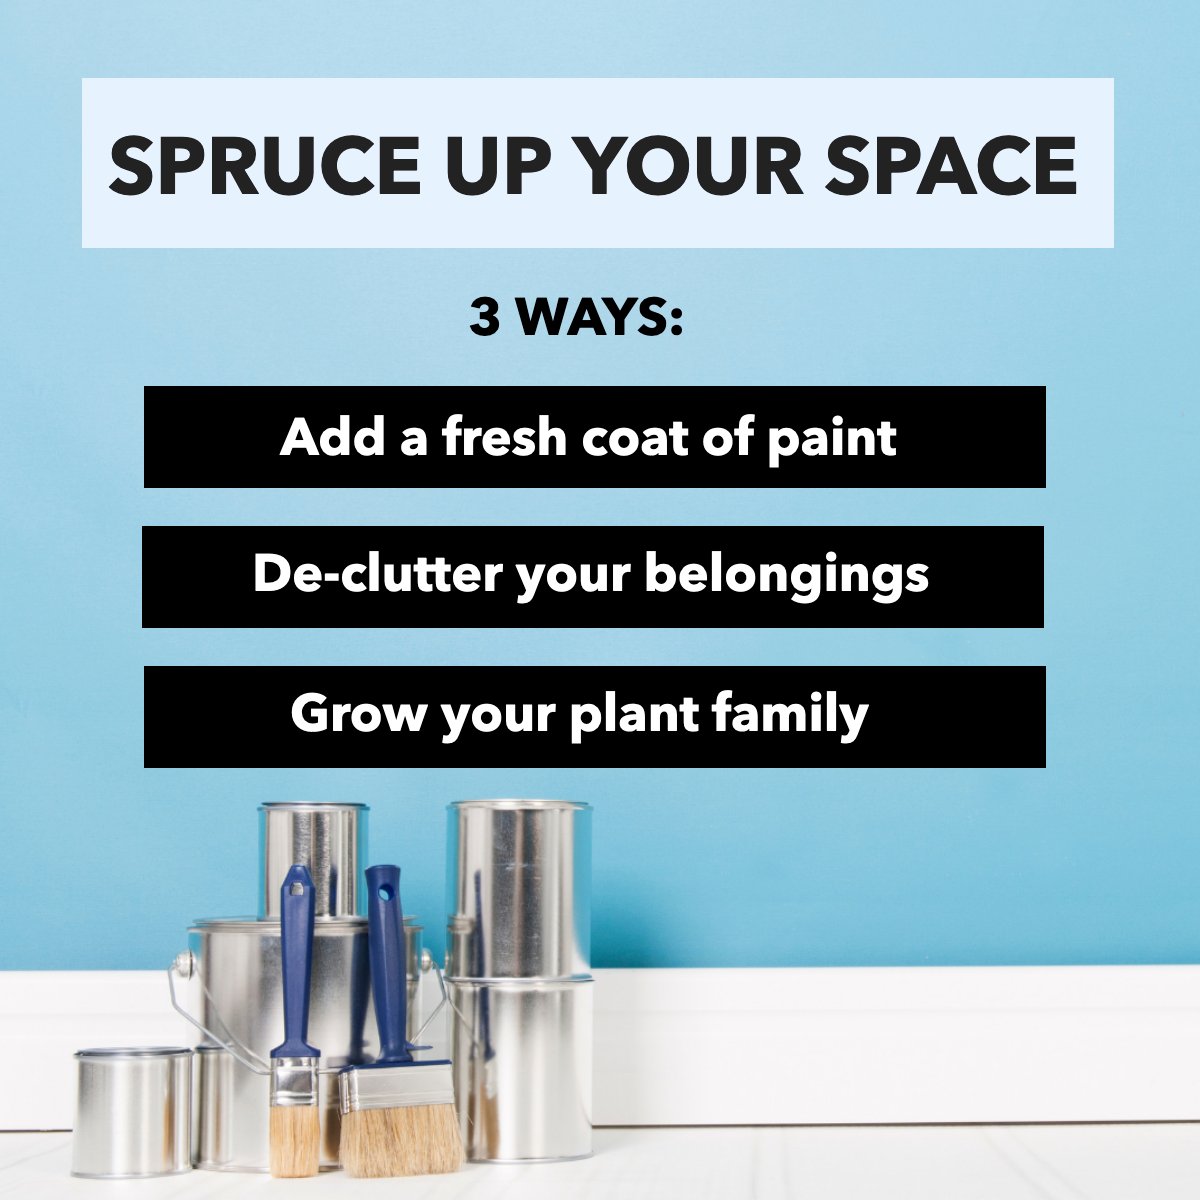 Find out 3 ways to give a fresh look to your spaces. 

#spruceupyourspace #spruceupyourhome #spruceuptheplace #freshpaint
 #realestate #CassieDealy #Senne #Realtor #HomeBuyer #HomeSeller #HomeOwner #JamesTrano #firsttimehomebuyer #HomeBuyerTips #HomeSellerTips